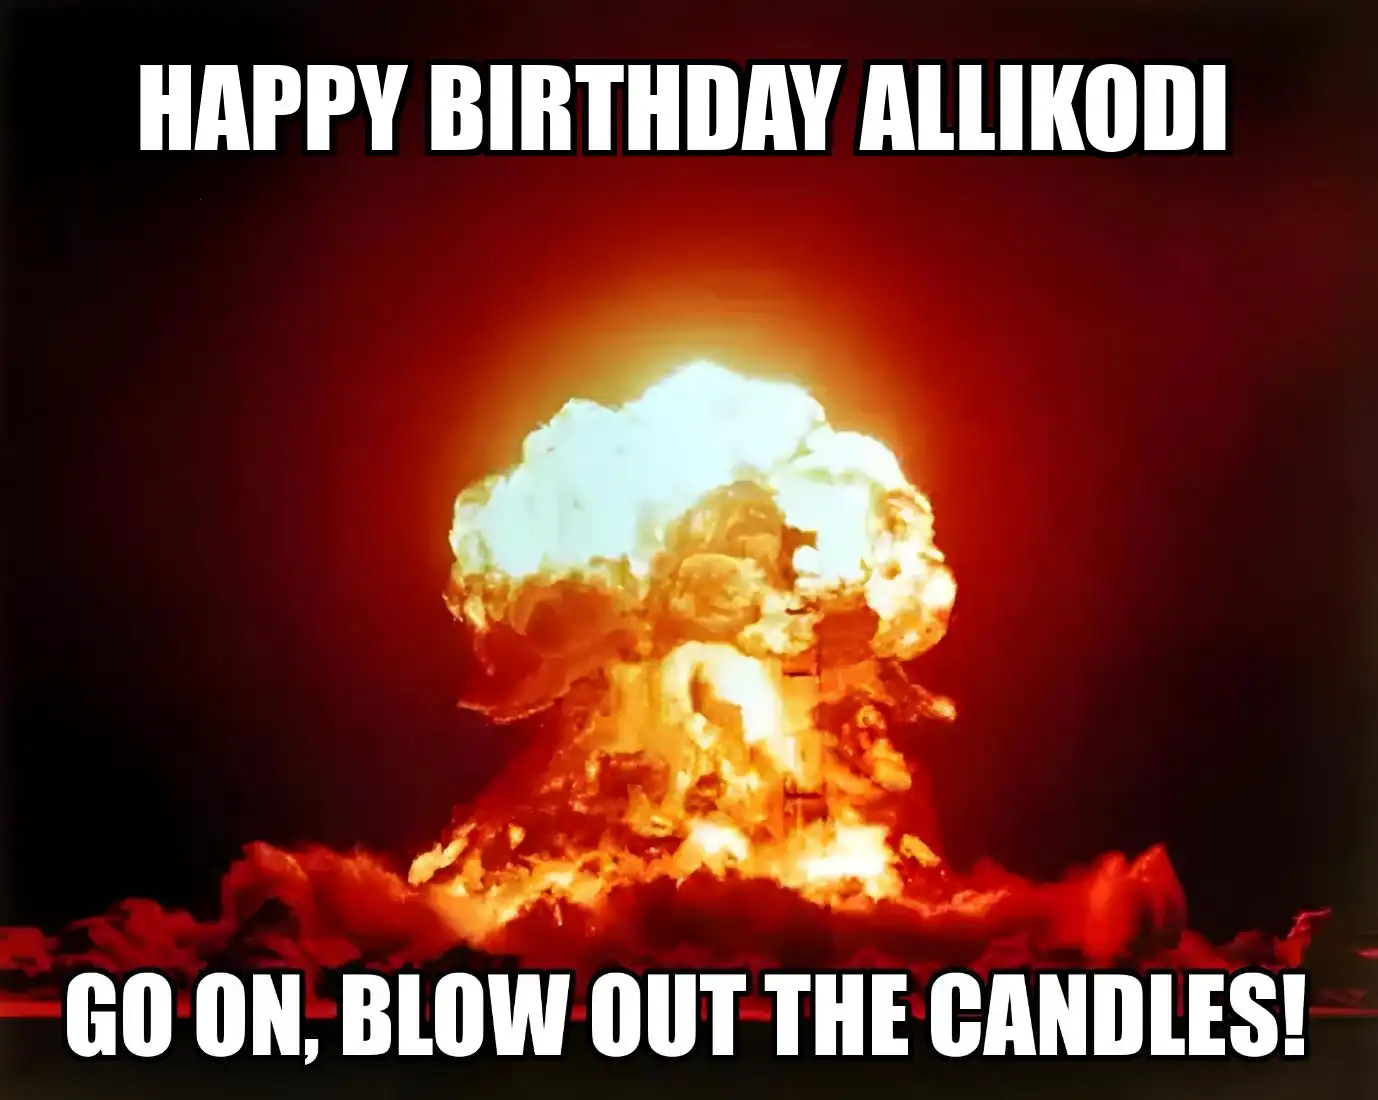 Happy Birthday Allikodi Go On Blow Out The Candles Meme